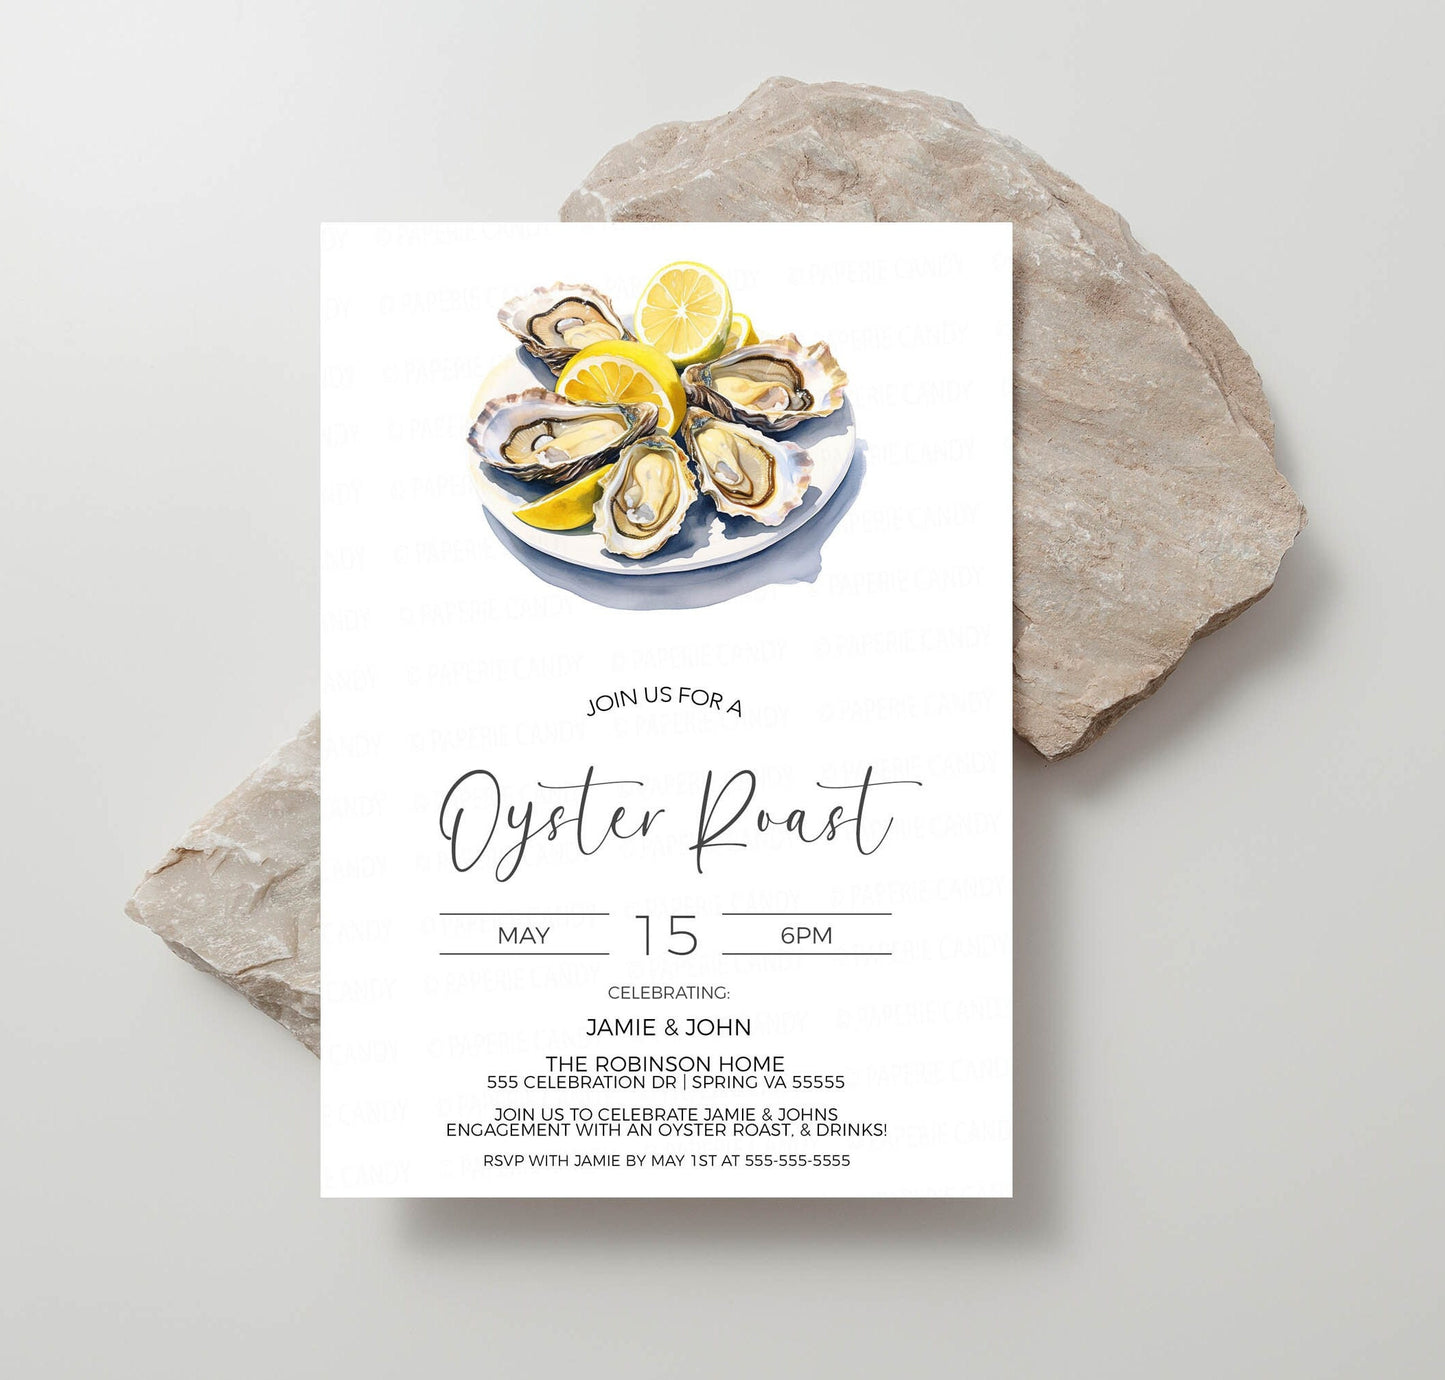 Oyster Roast Invitation, Bridal Shower, Oyster Couples Wedding Shower Invite, Seafood Raw Bar, Birthday, Engagement Party, Editable Template